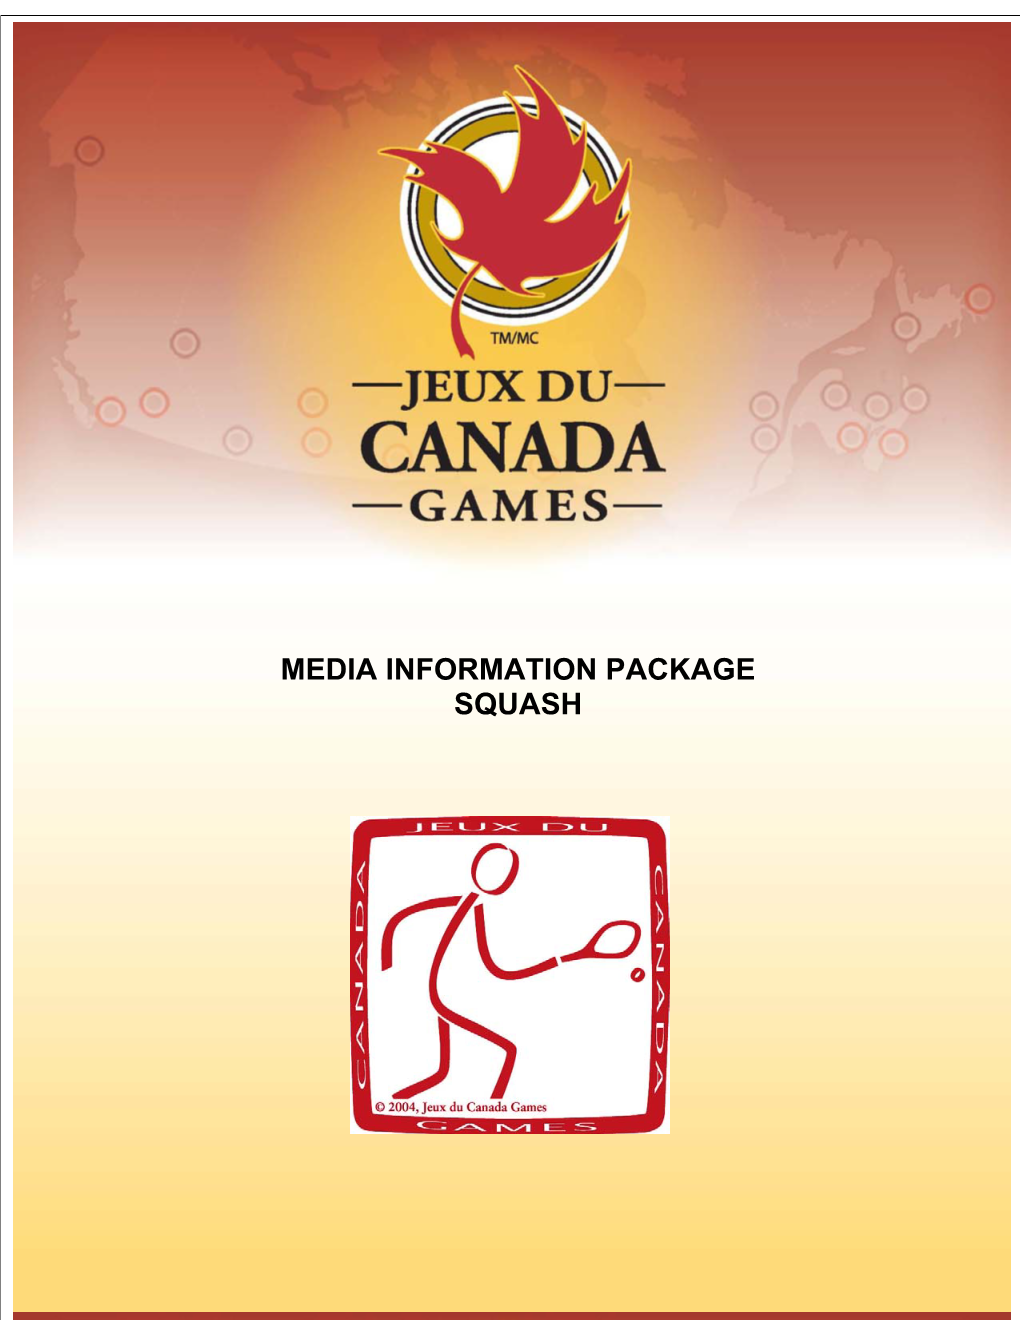 Media Information Package Squash